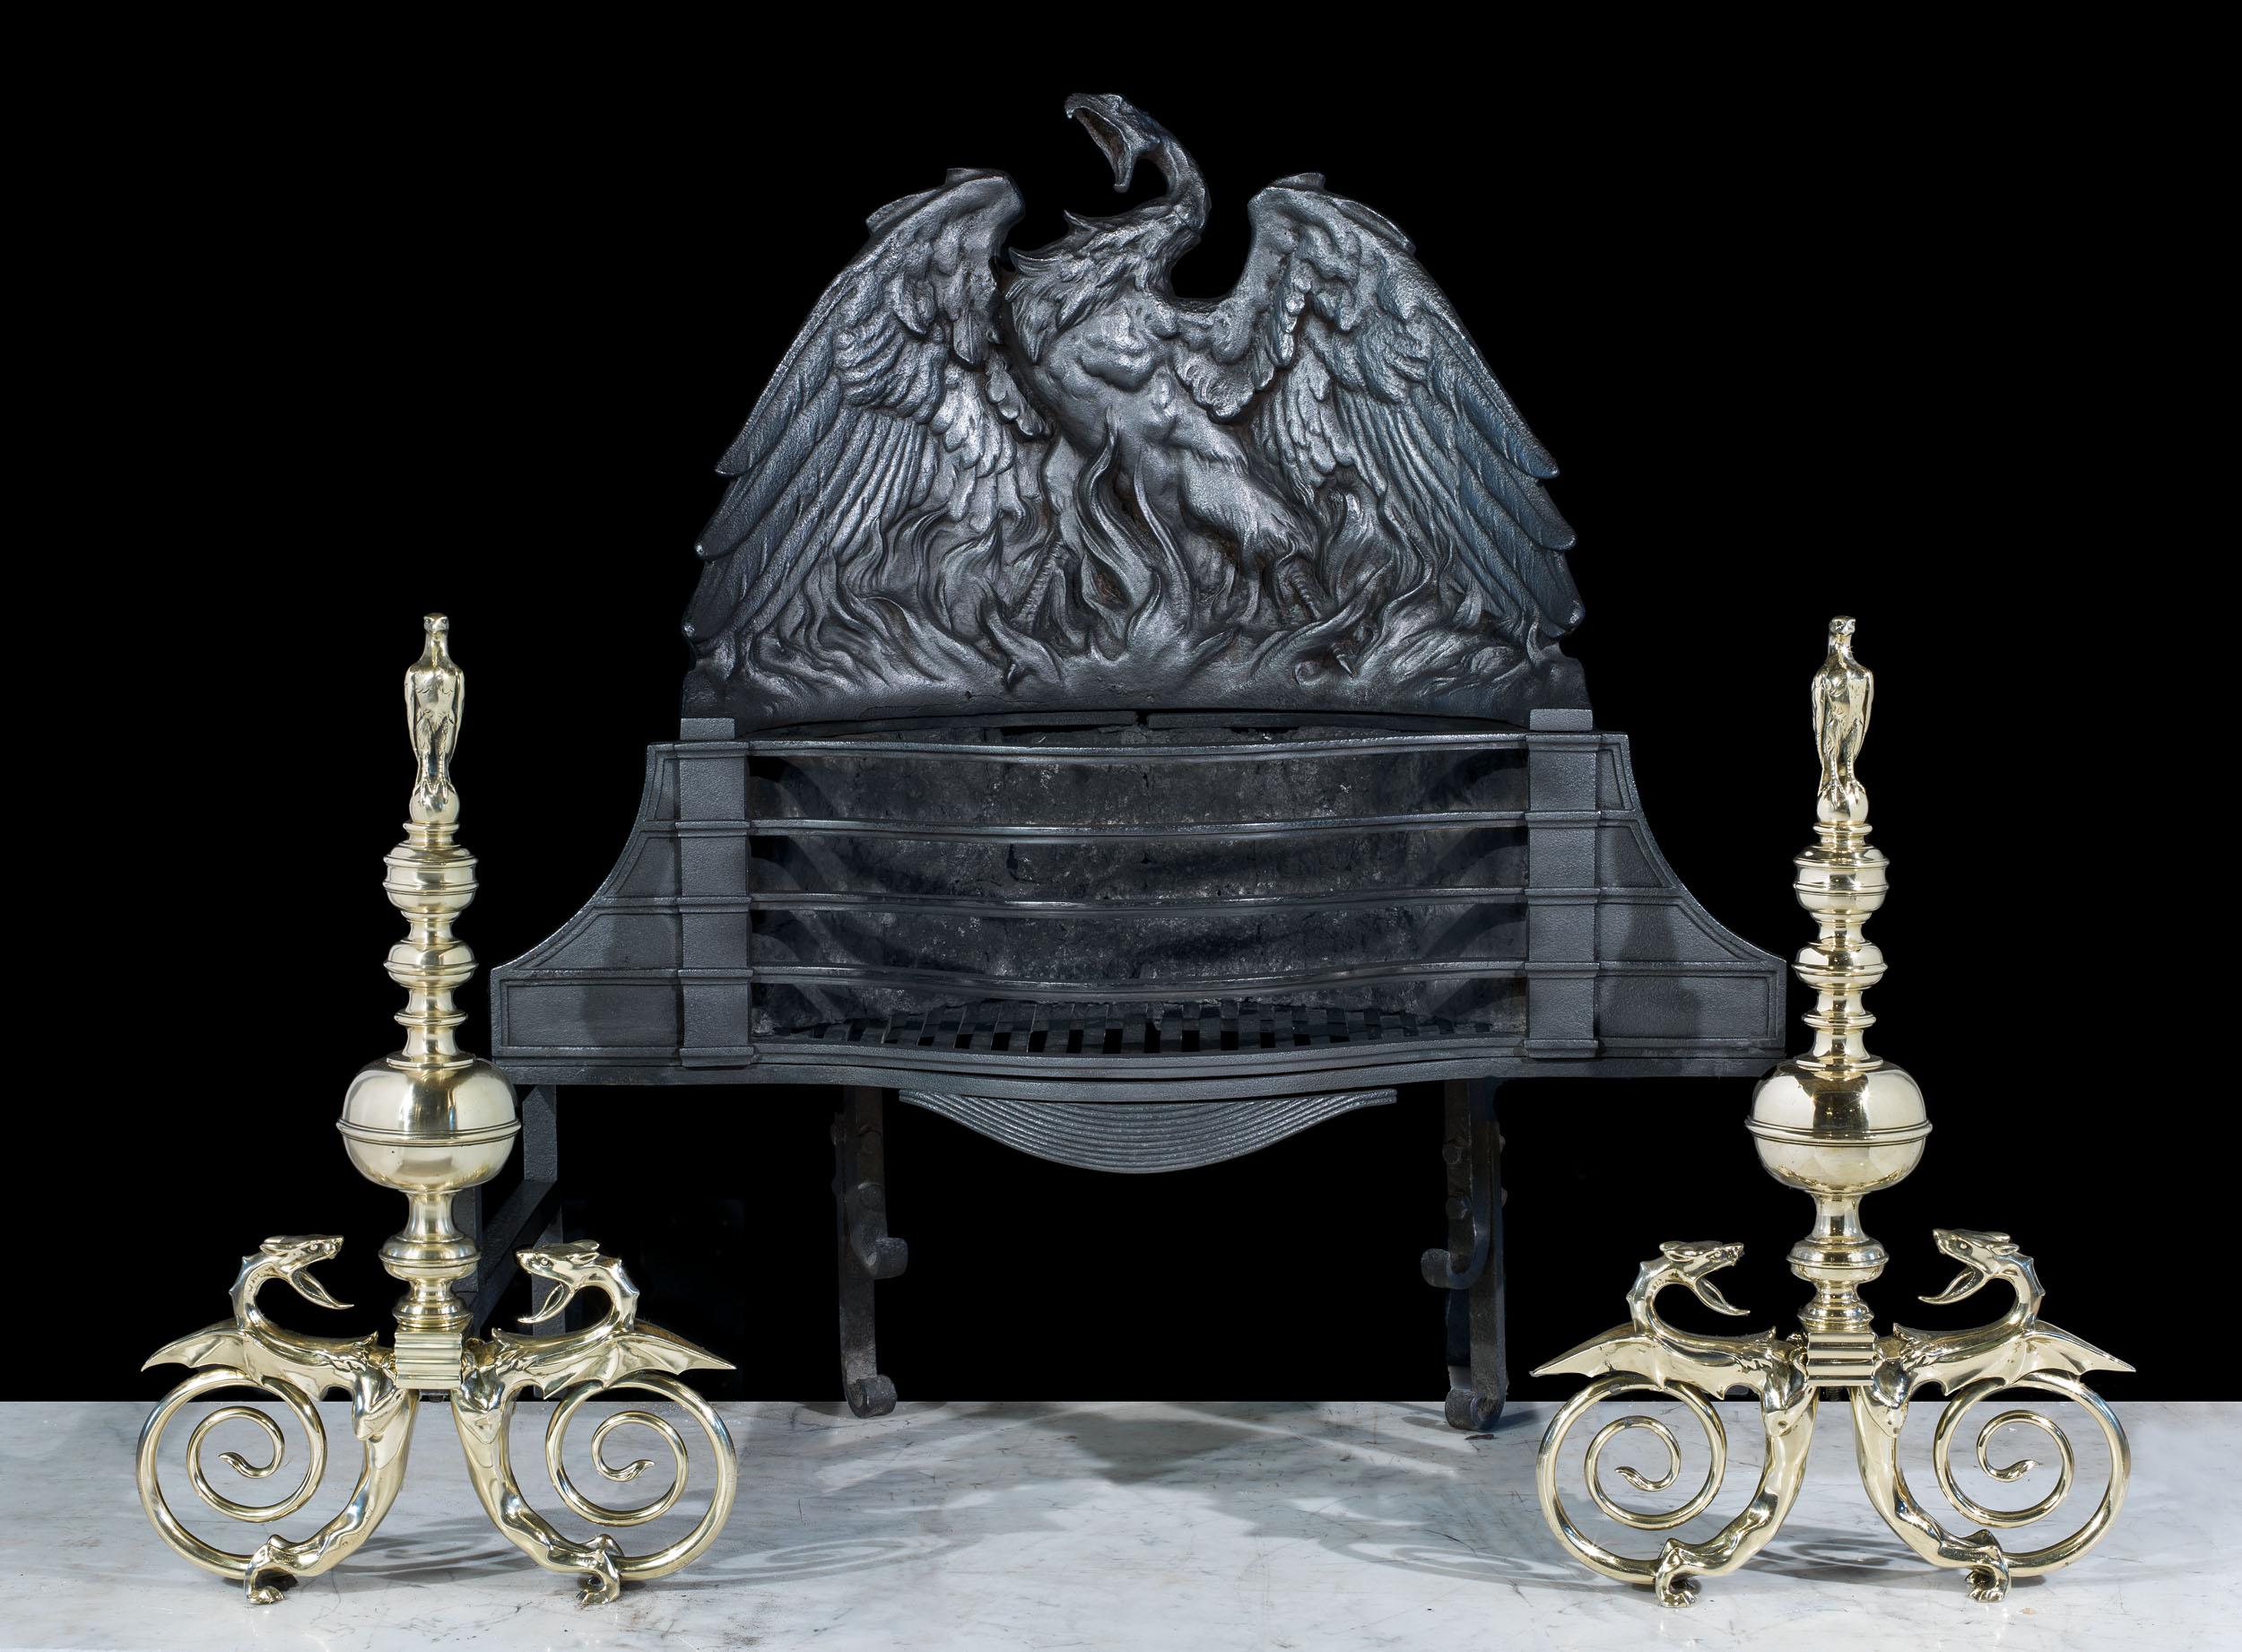 A rare and majestic fire basket, depicting a phoenix rising from the flames. The phoenix fire back is mounted above a large four barred grate, which rests on brass andirons. The andirons are surmounted by eagles, and the sinuous feet form winged